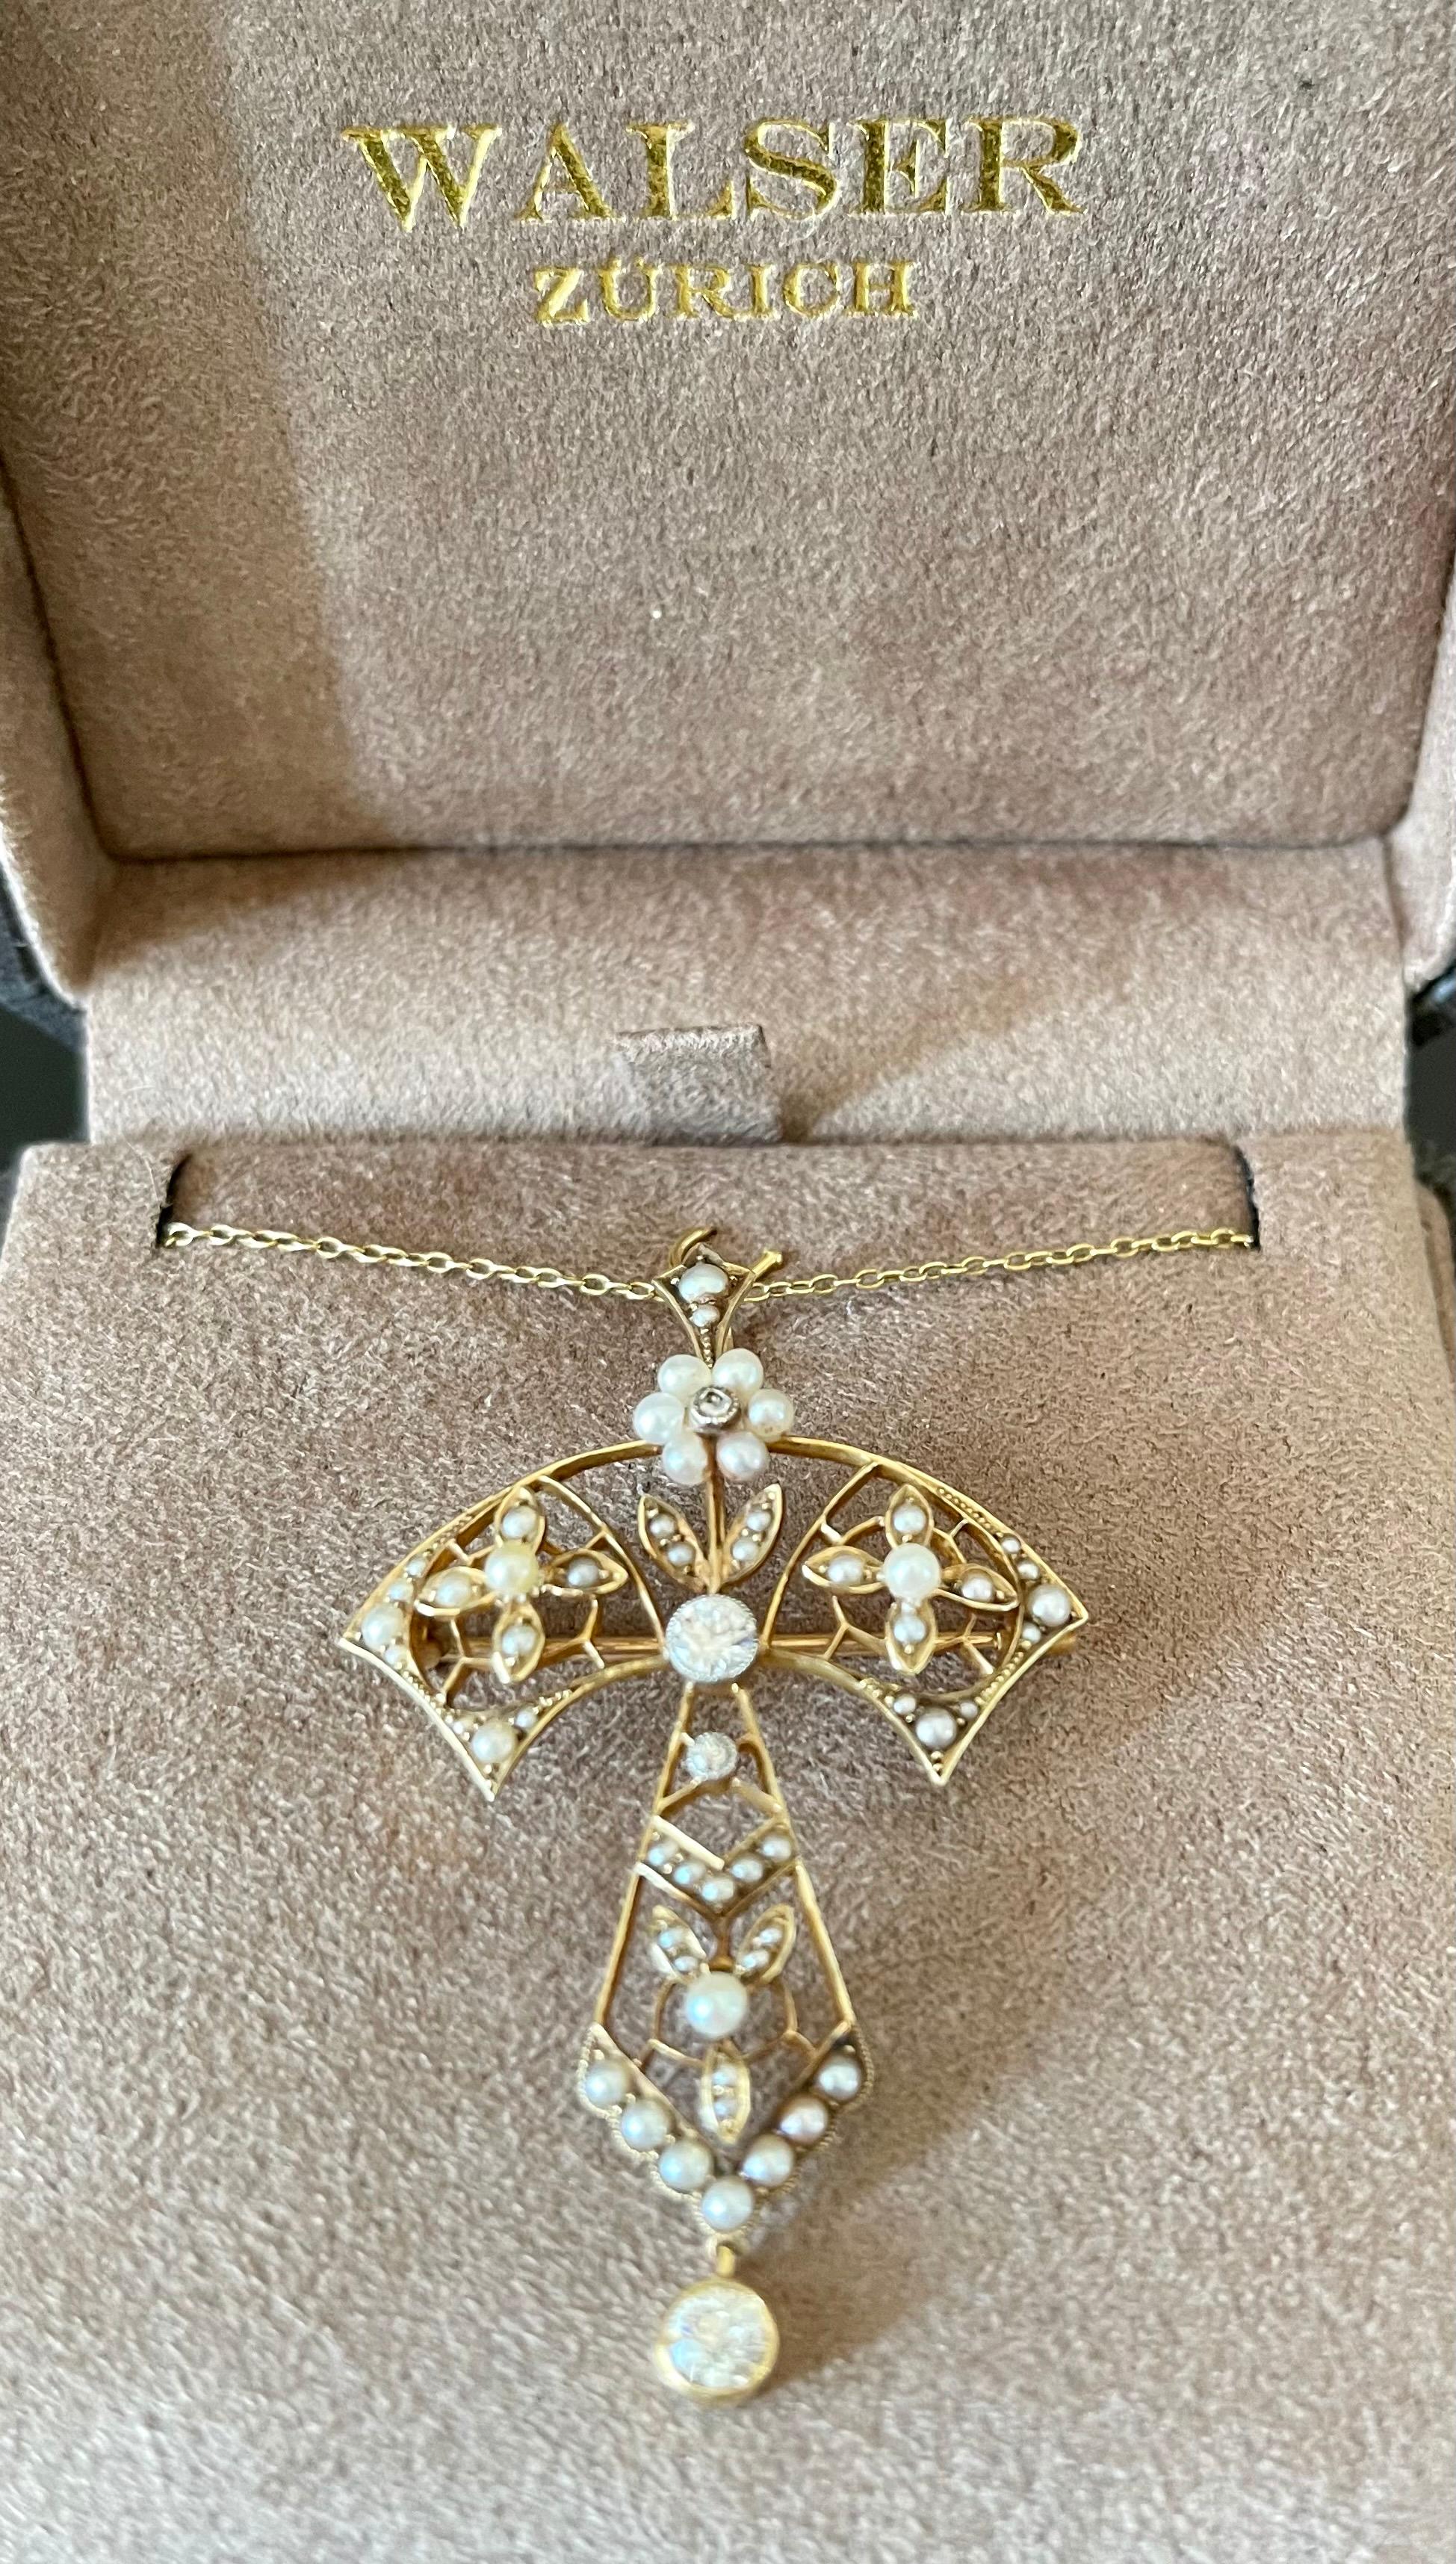 A stunning pendant/brooch with chain from the Art Nouveau era. This fine piece has been crafted in 15 K yellow Gold. Set with 3 brilliant cut Diamonds weighig approximately 0.42 ct and seed Pearls. 
Lenght of the chain: 50 cm
Masterfully handcrafted